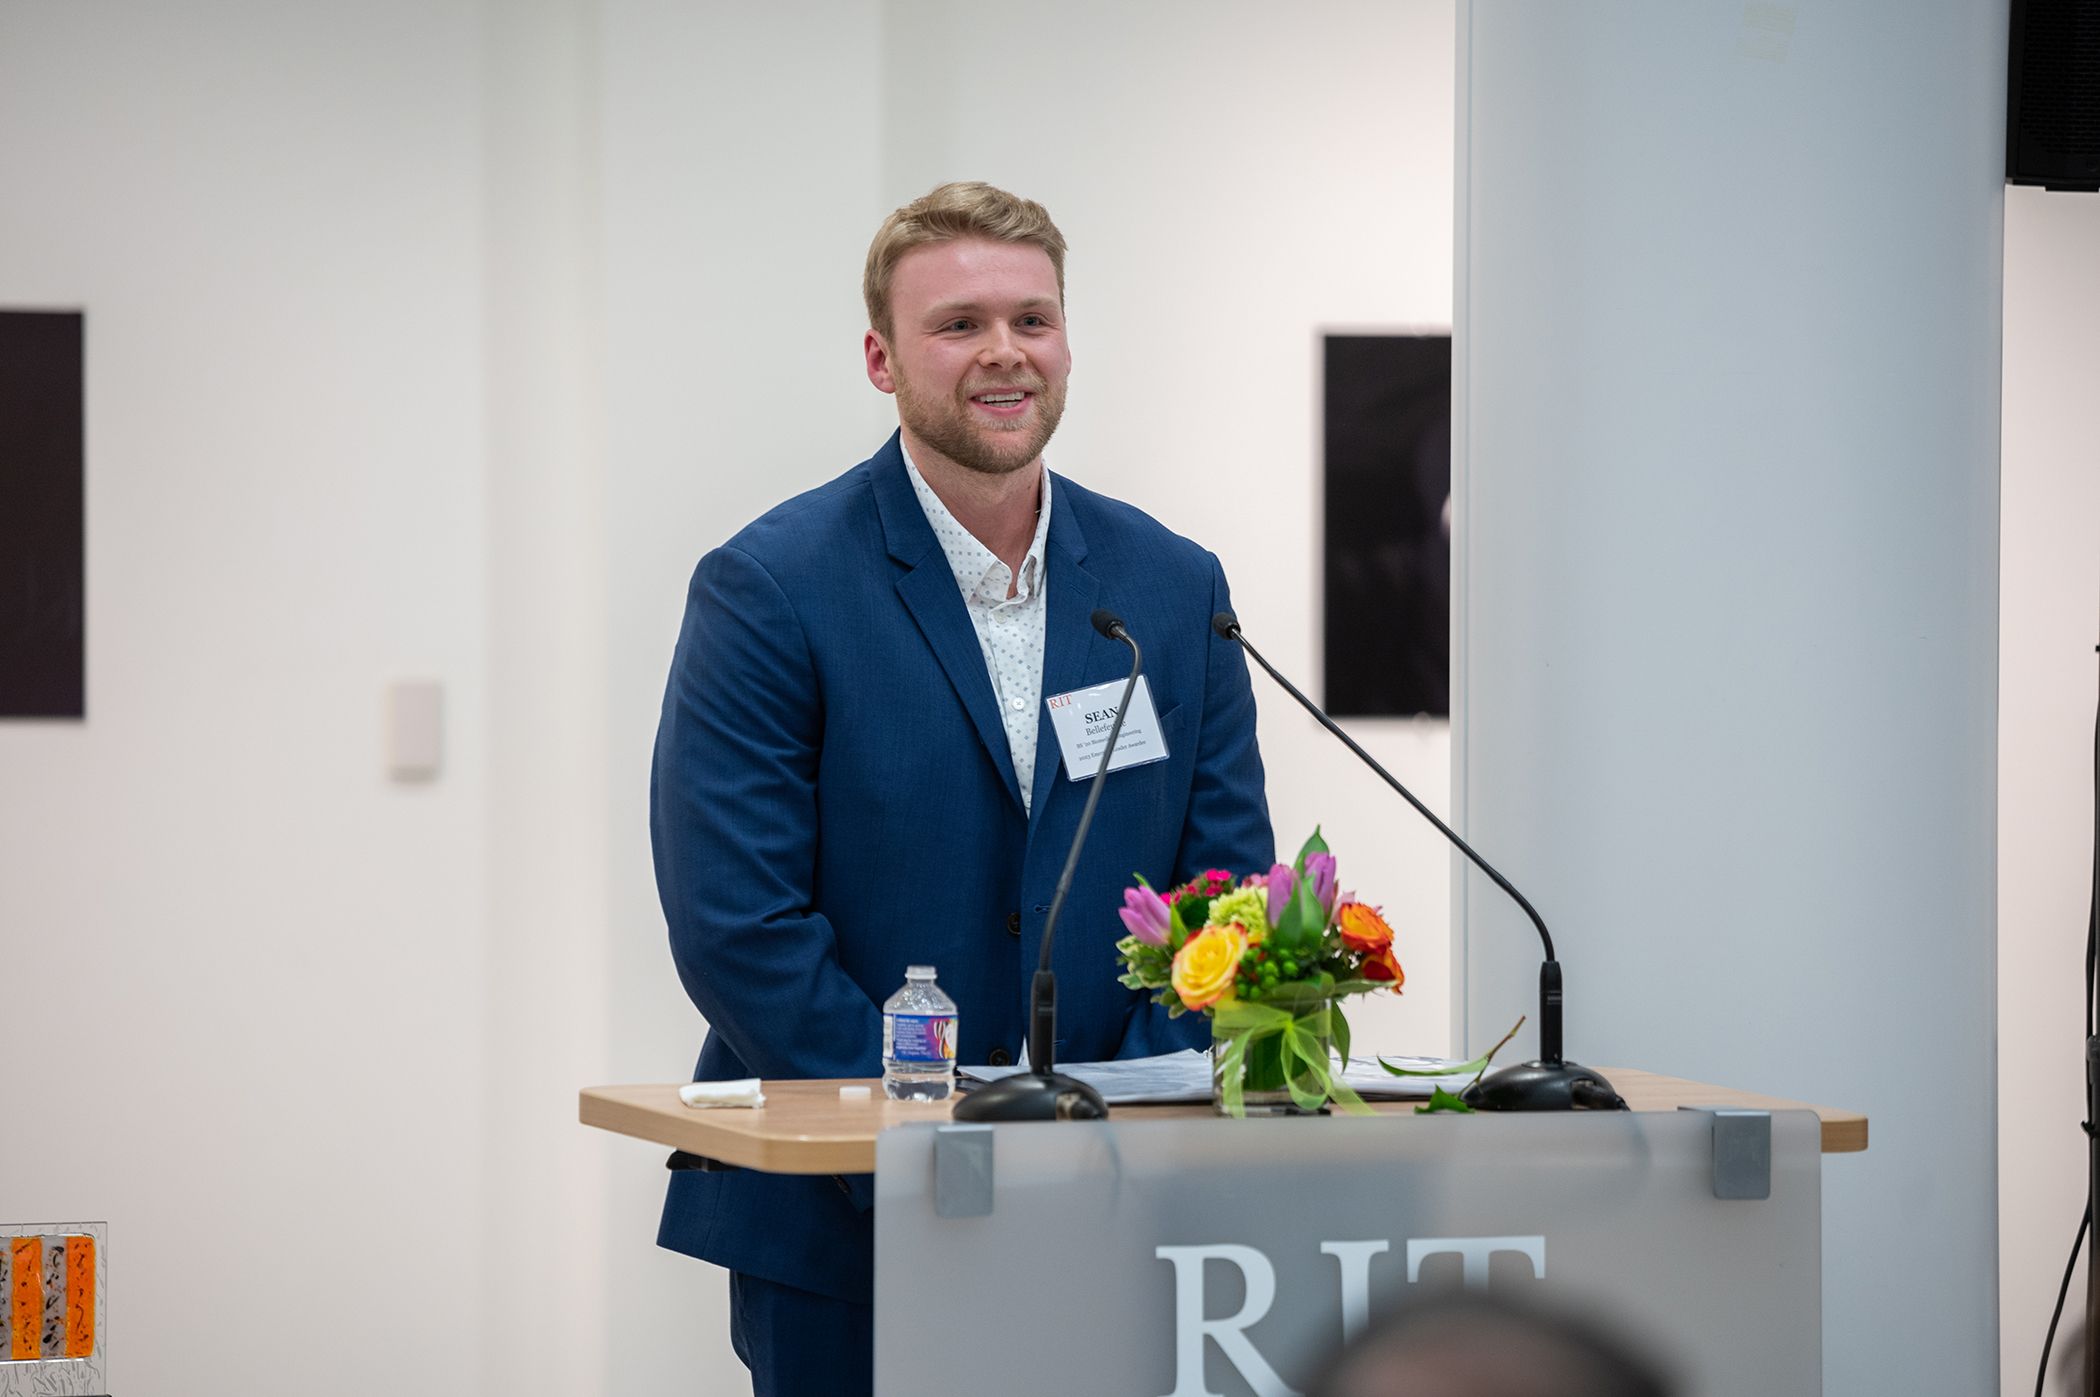 Sean Bellefeuille accepts the Kate Gleason College of Engineering Emerging Leader Award while standing at a podium with a microphone.